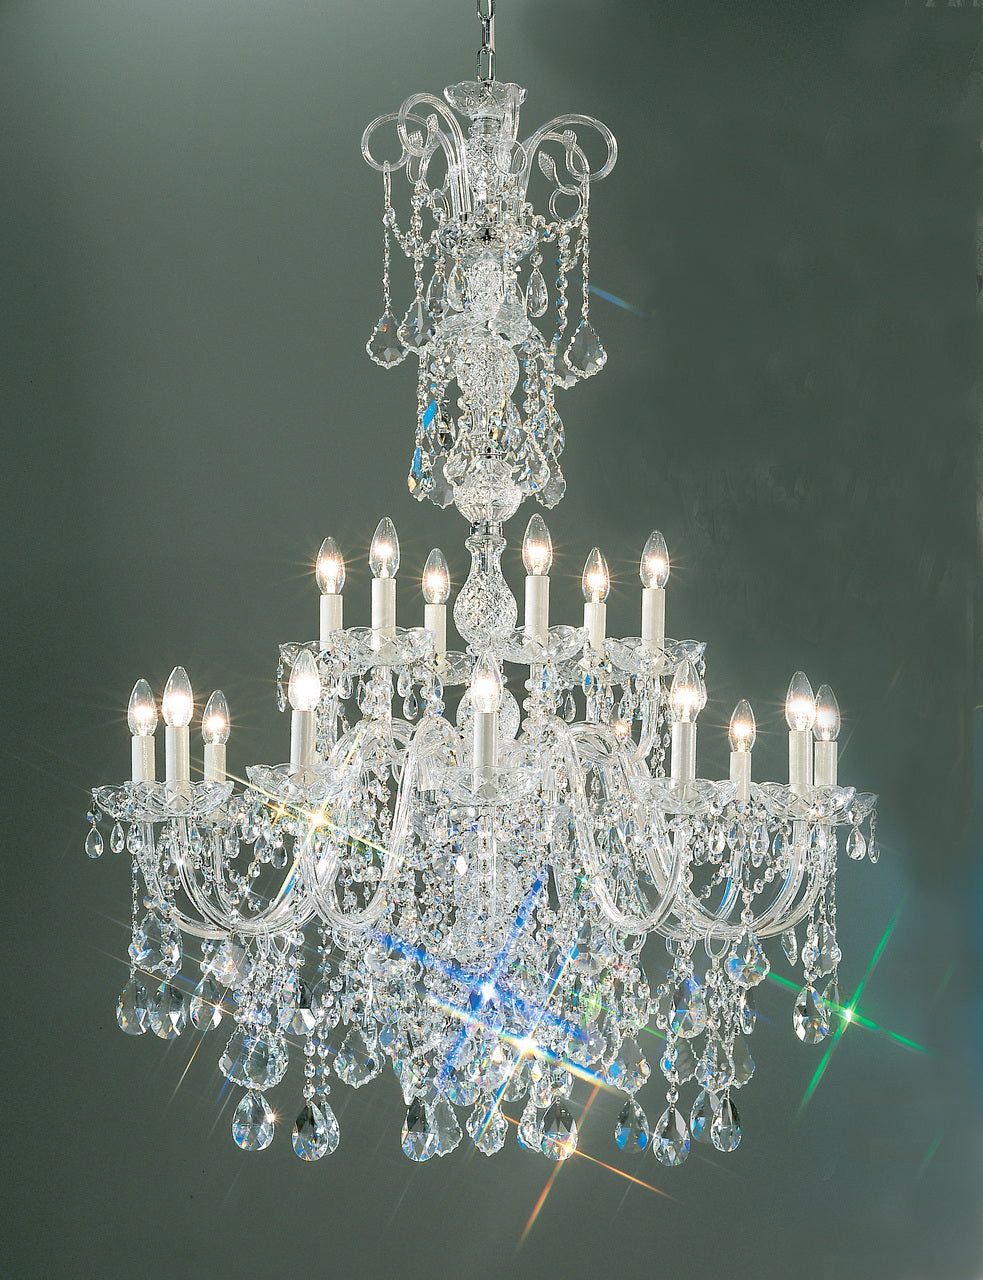 Classic Lighting 8263 CH SC Bohemia Crystal/Glass Chandelier in Chrome (Imported from Italy)